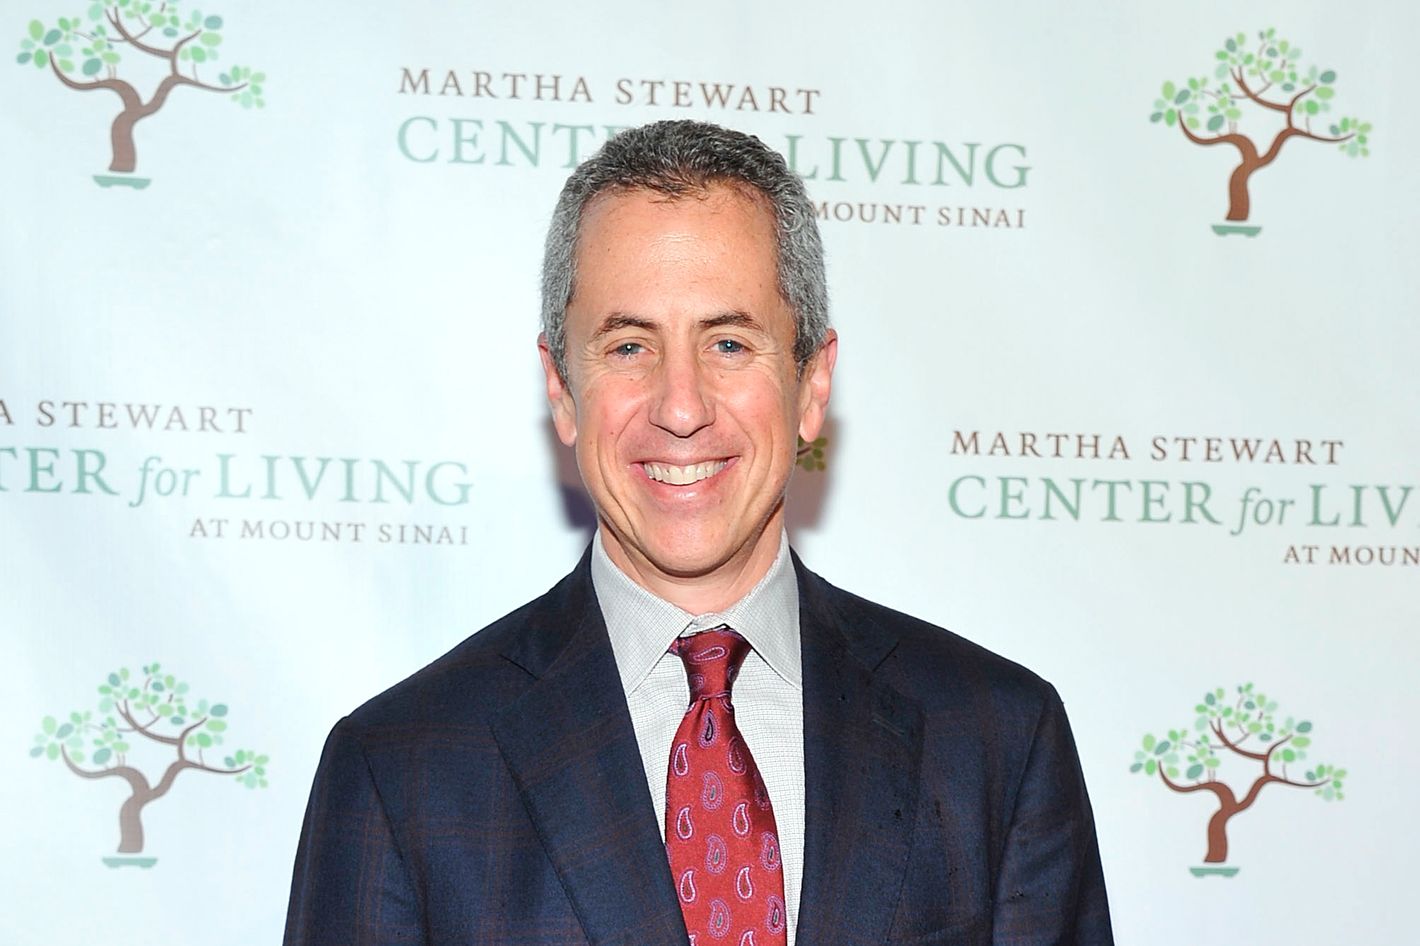 Danny Meyer Says Shack Burgers Probably Didn't Make Coach and Player Sick